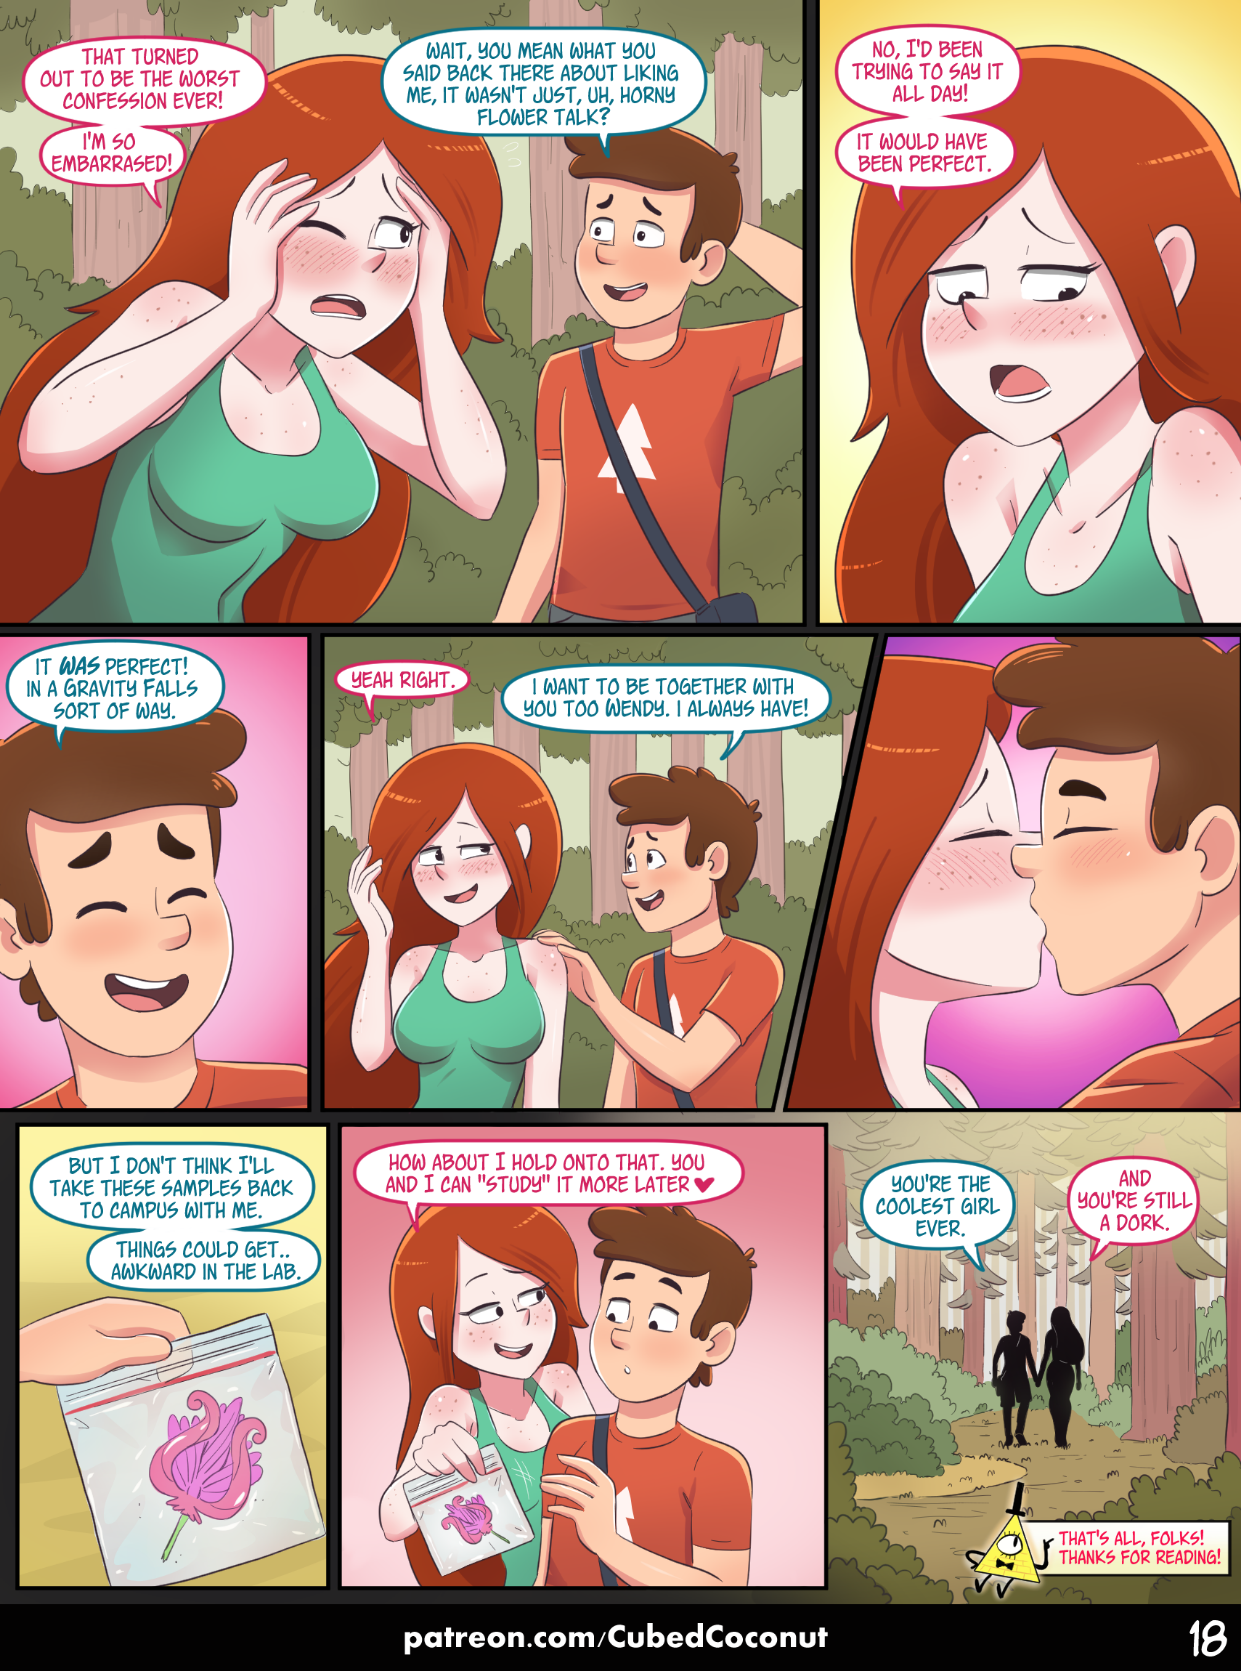 CubedCoconut: "Here's the end of the Wendy comic, thanks for rea....